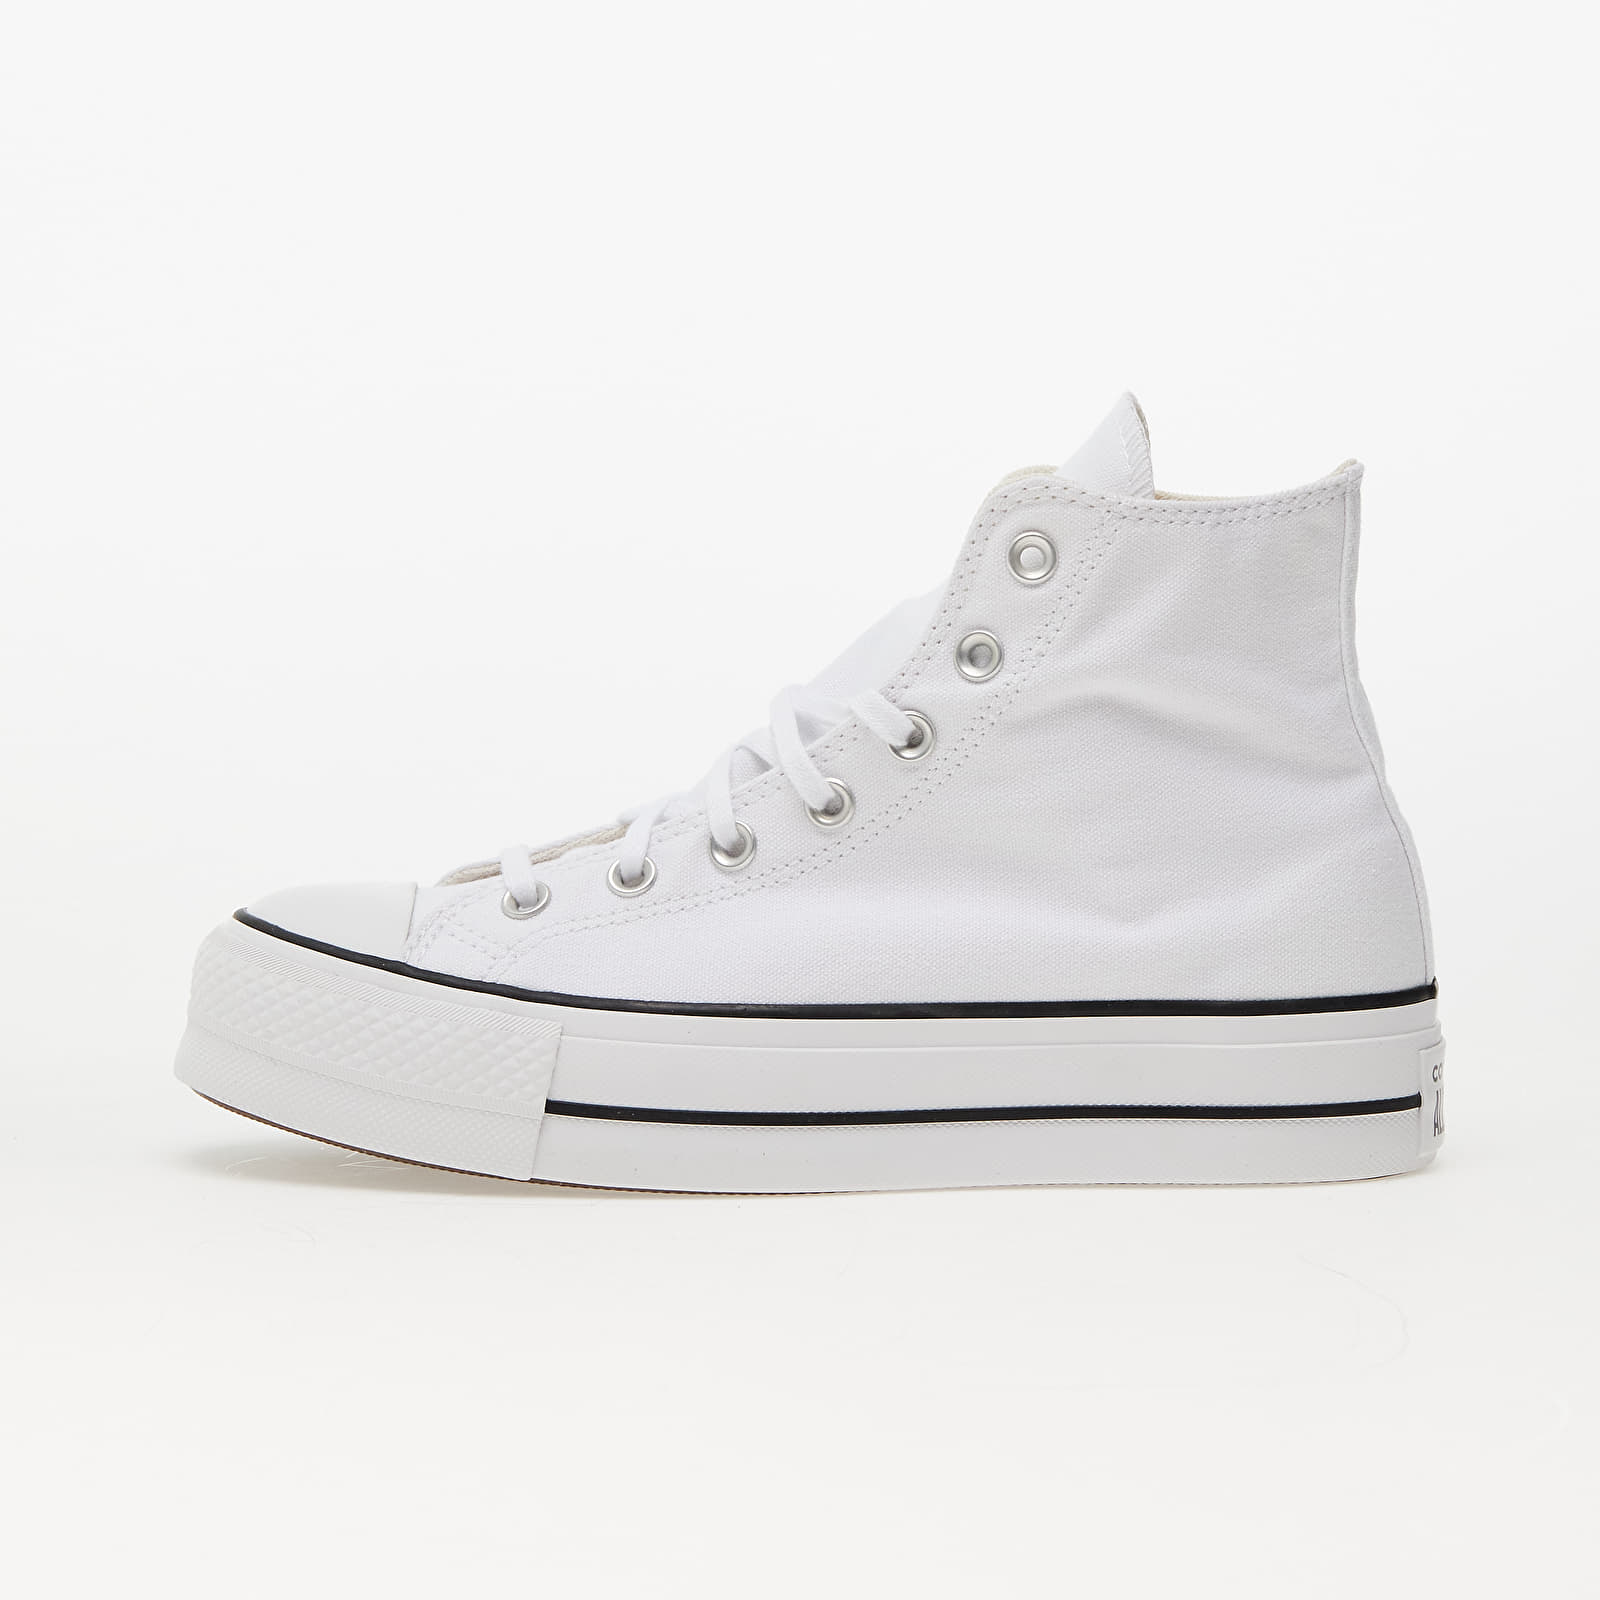 Women's sneakers and shoes Converse Chuck Taylor All Star Lift Hi White/ Black/ White